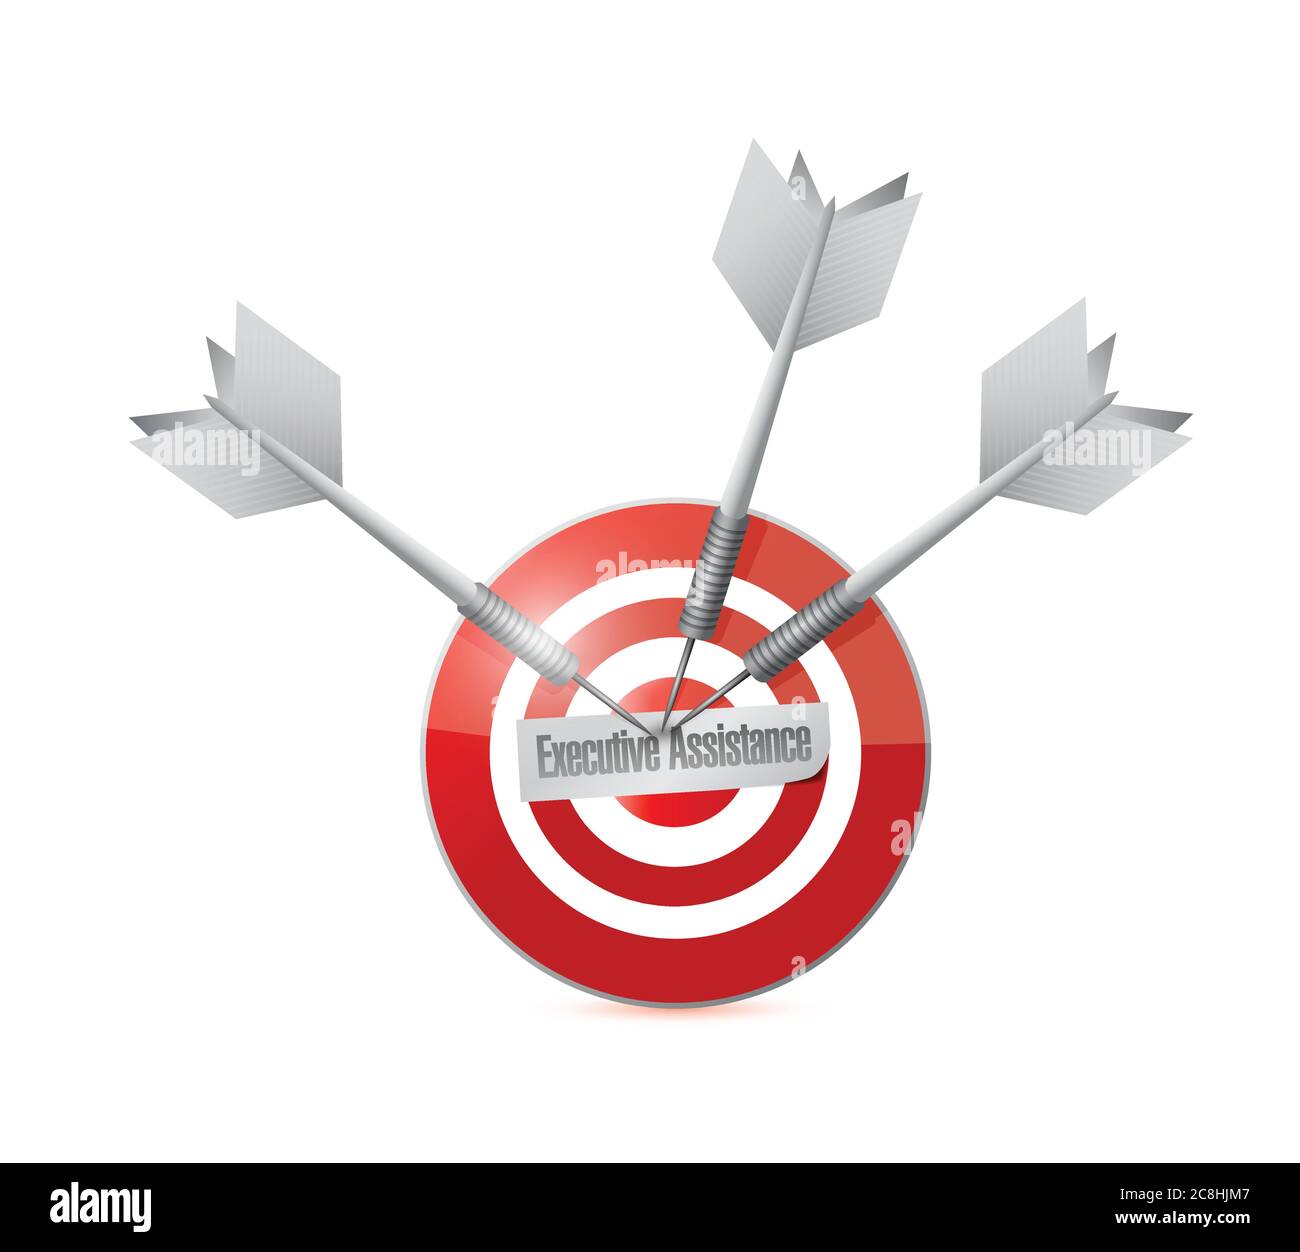 Executive assistance target sign concept illustration design graphic Stock Vector